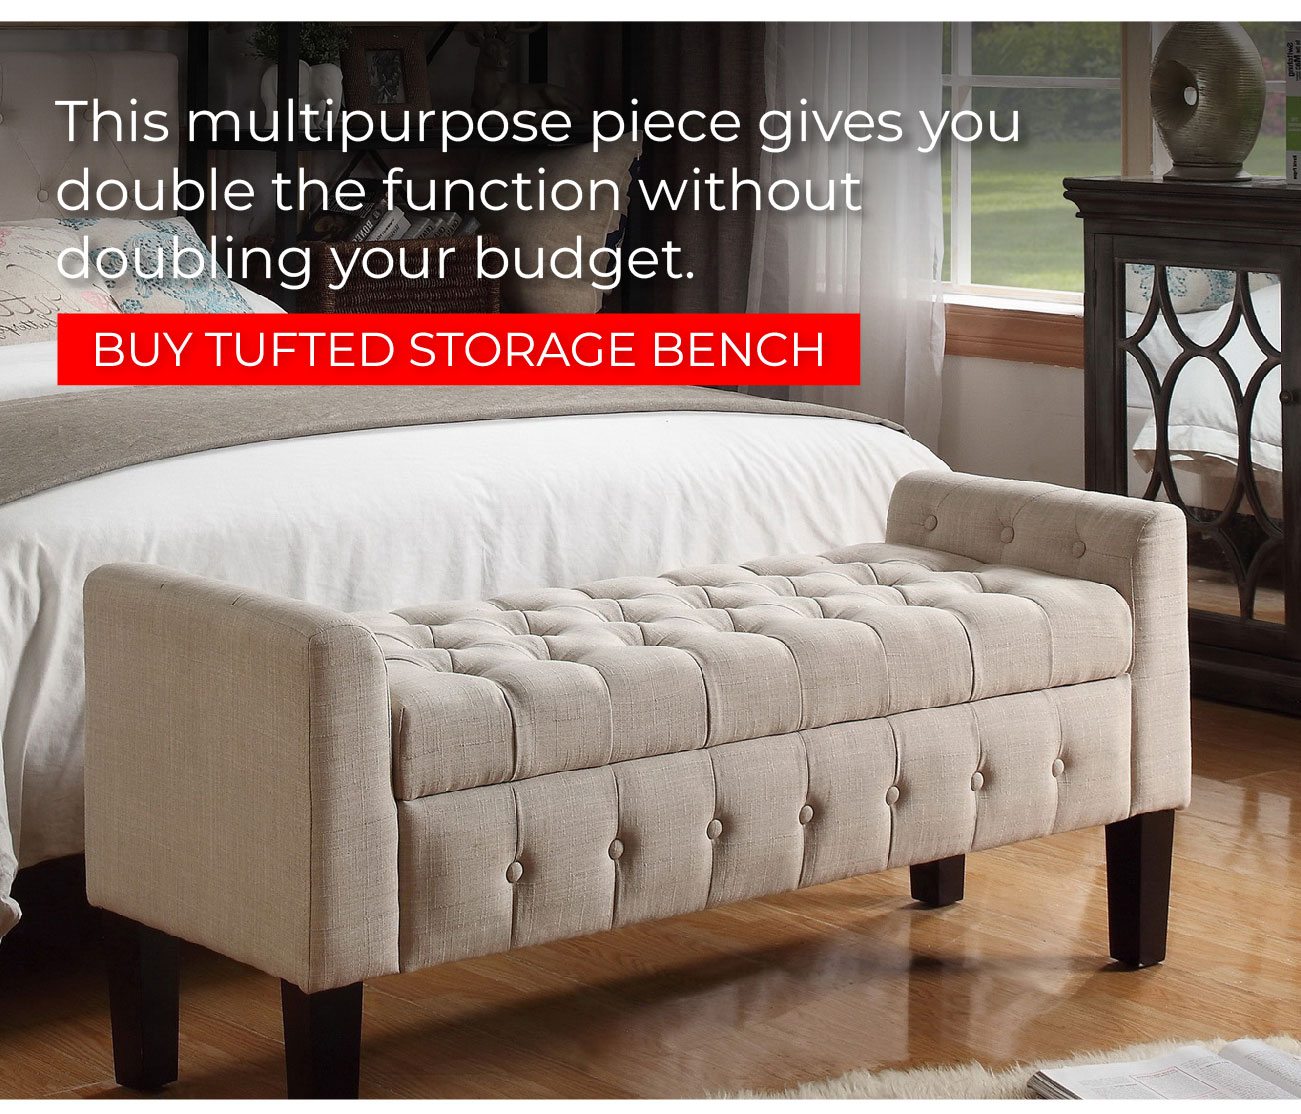 Tufted Armed Storage Bench